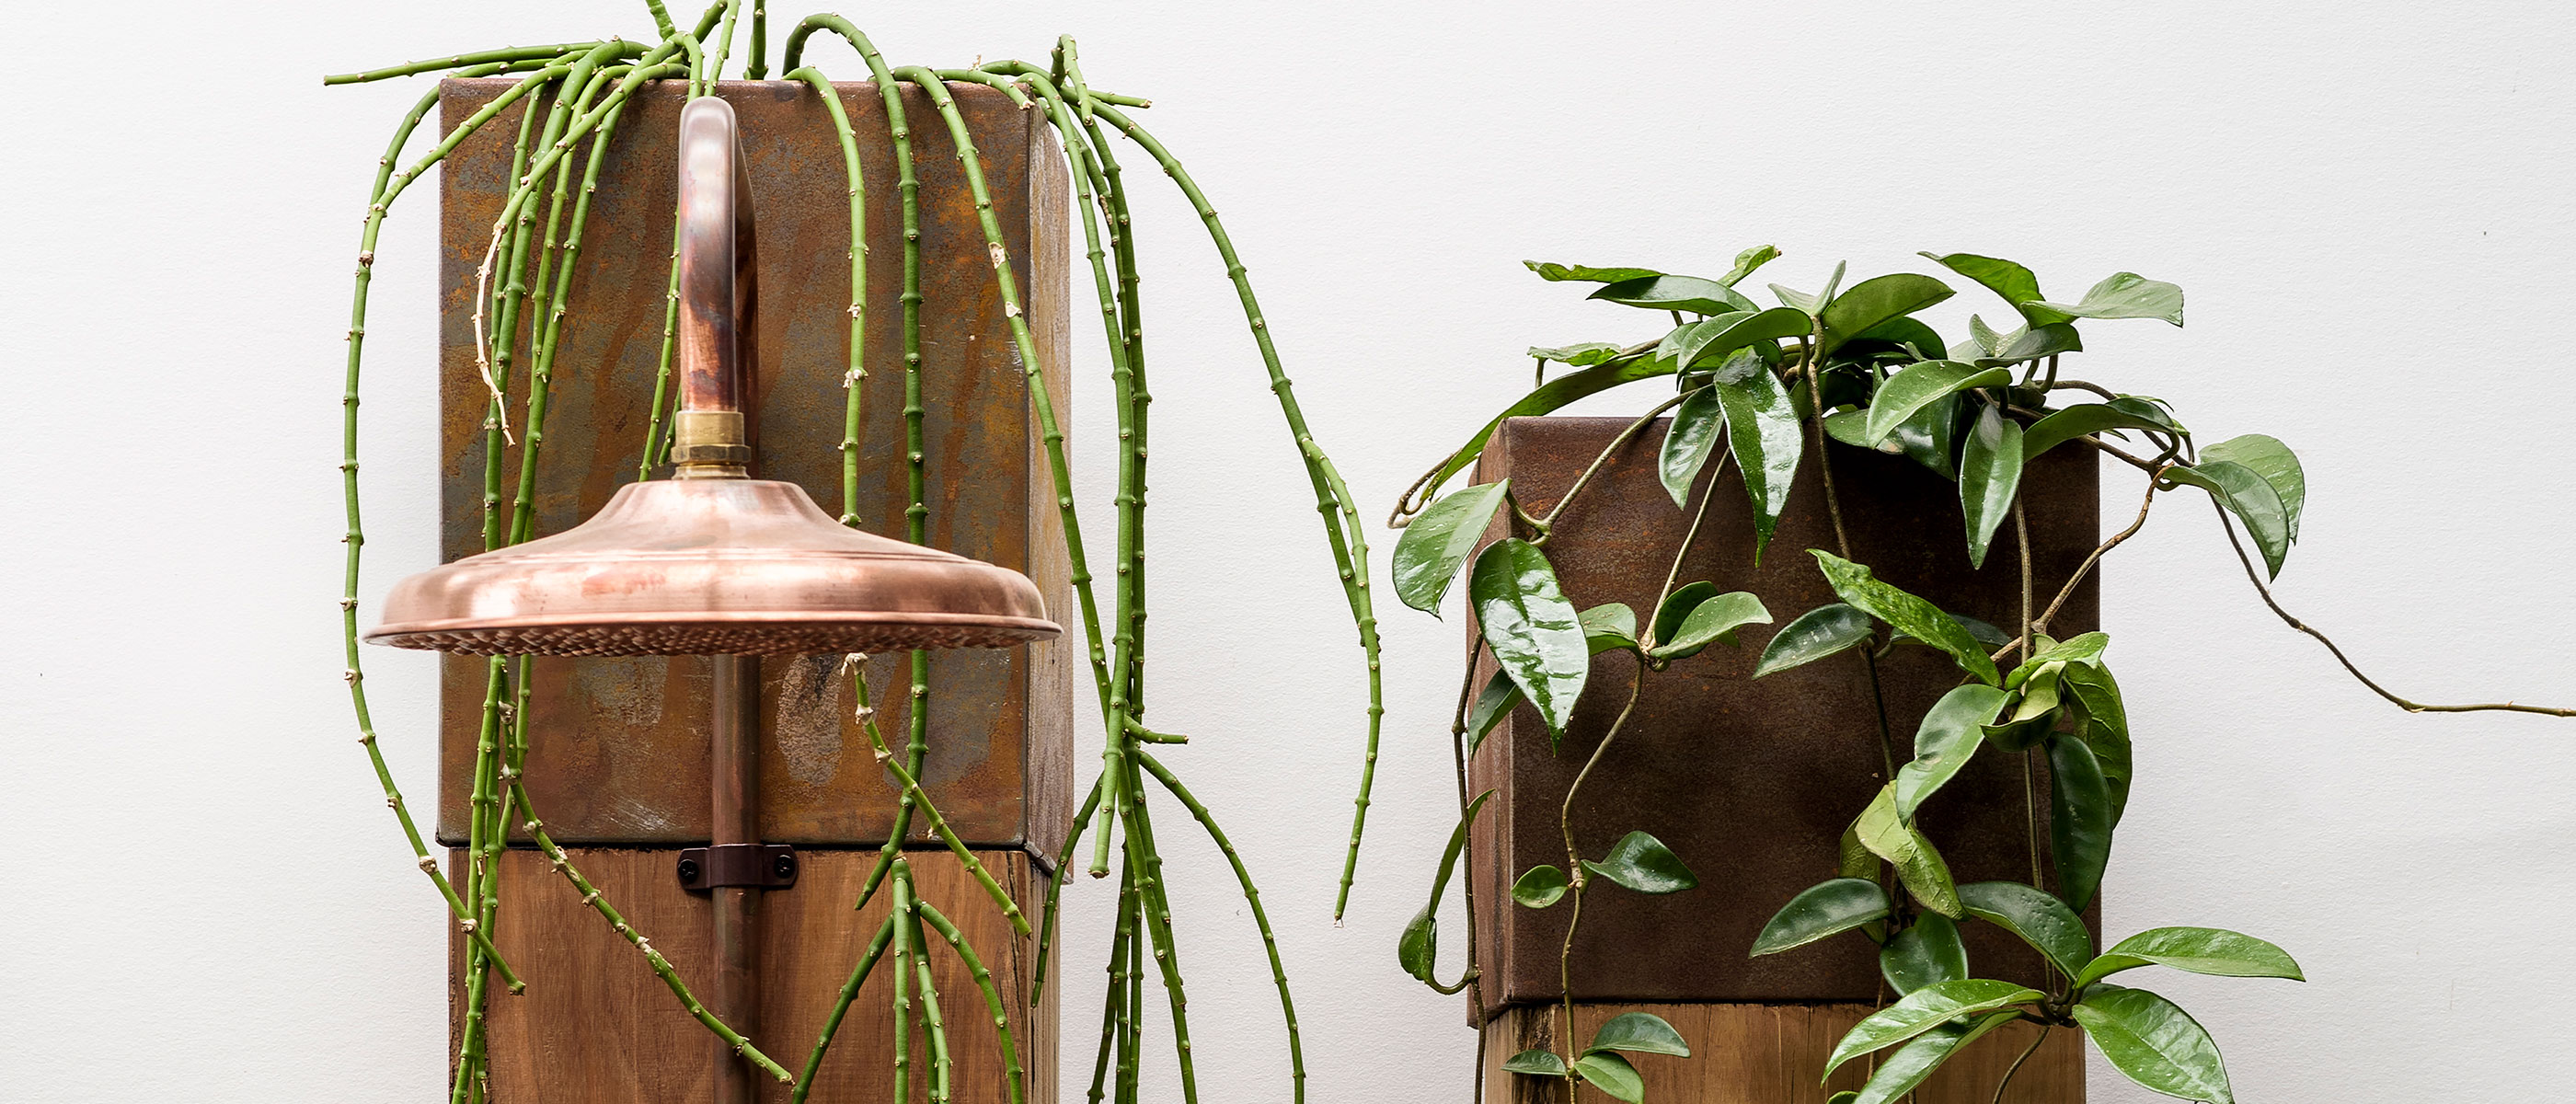 Custom recycled railway sleeper outdoor showers with copper fixtures and Corten planter boxes